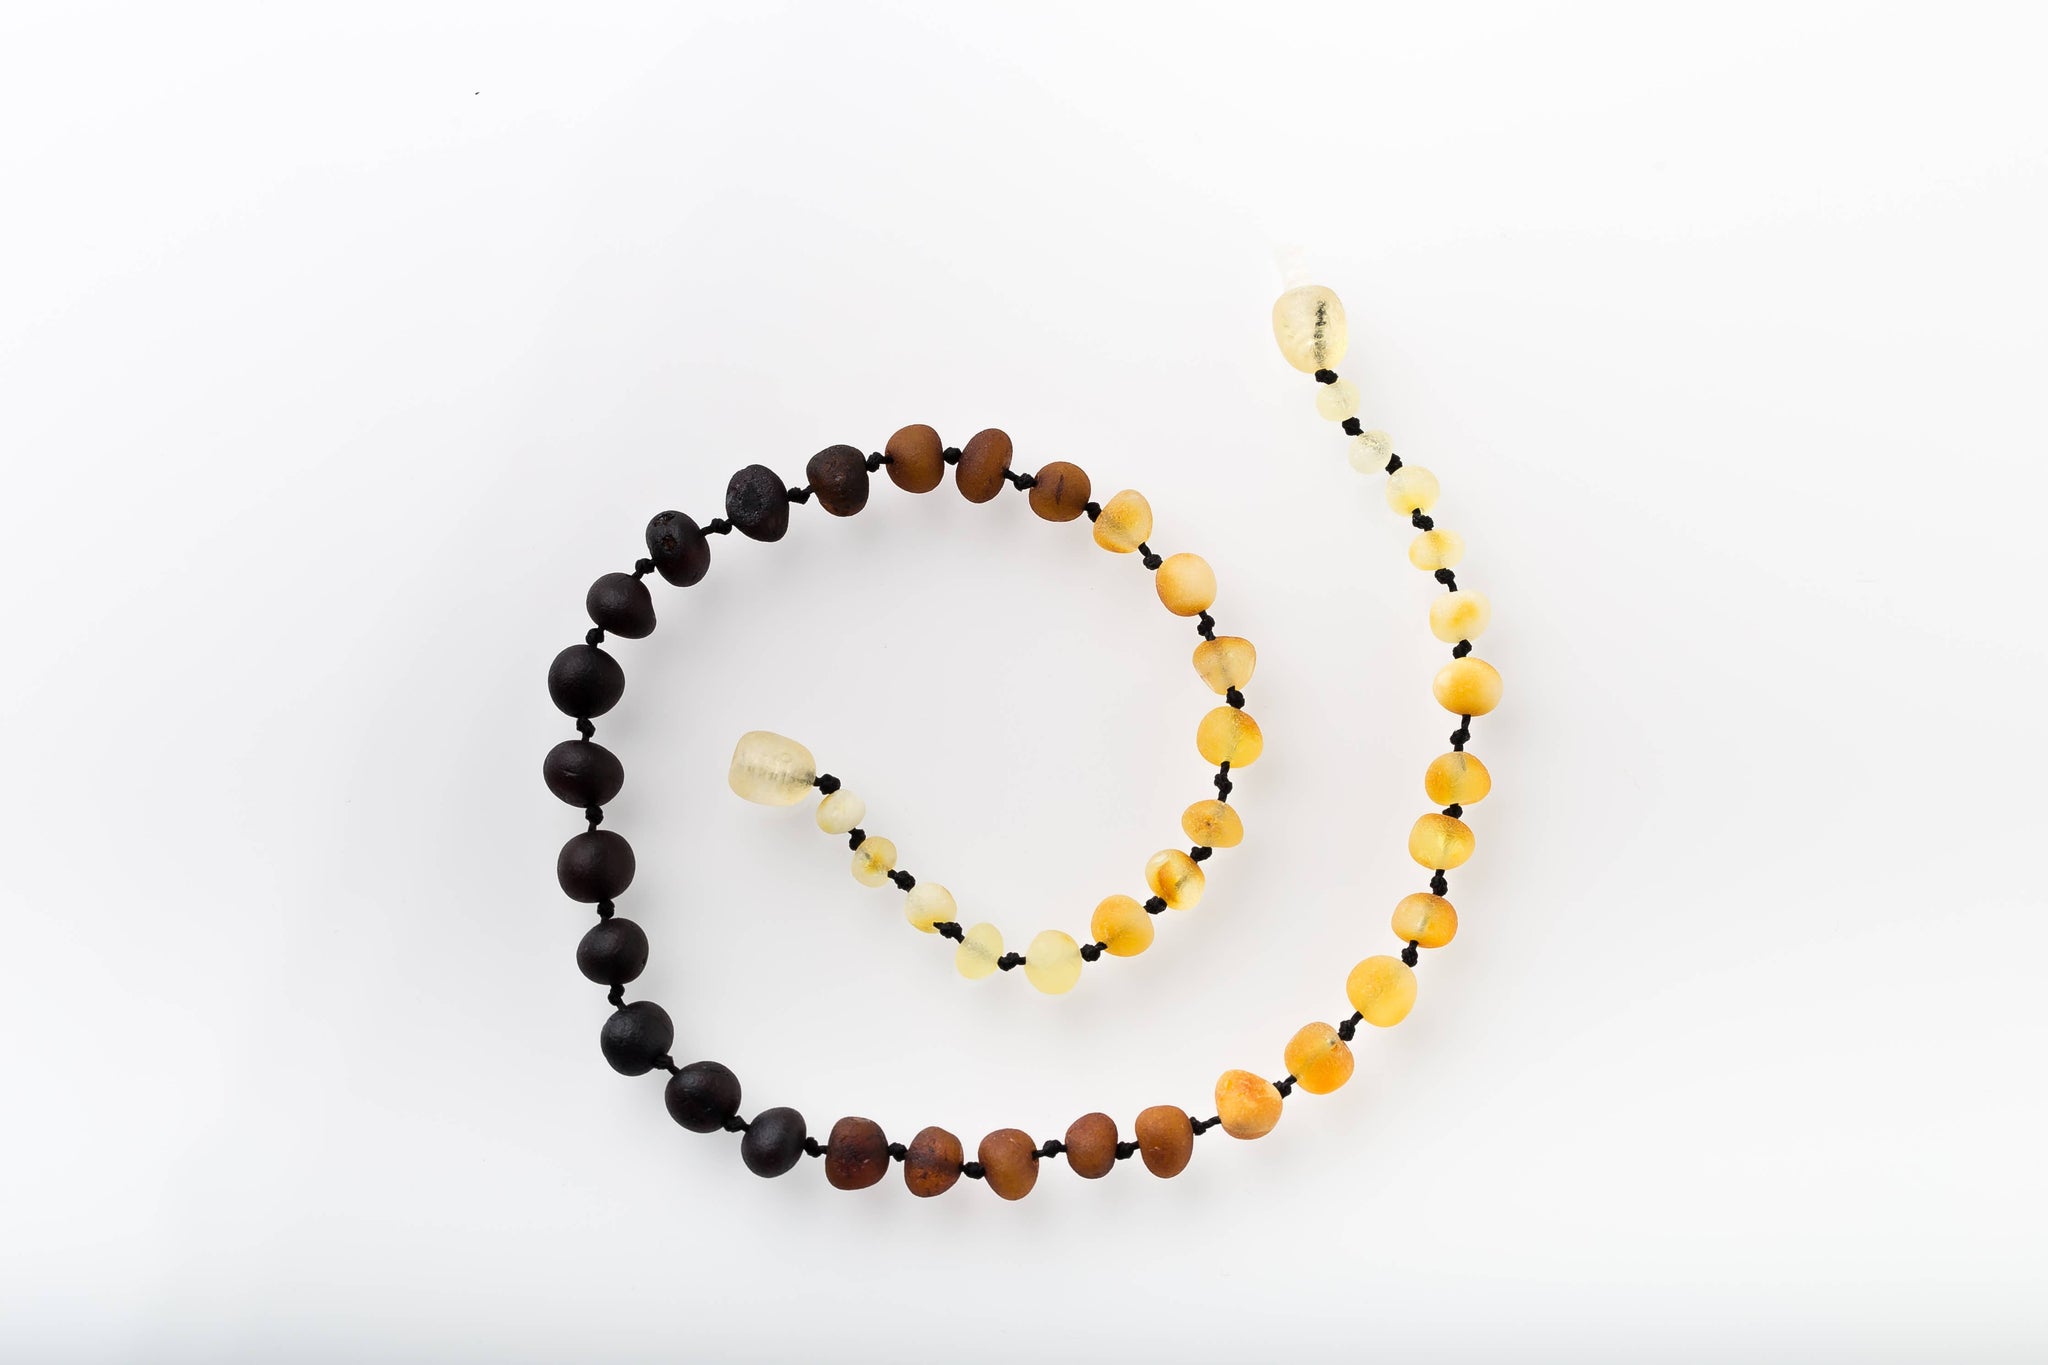 Certified Baltic Amber Necklace